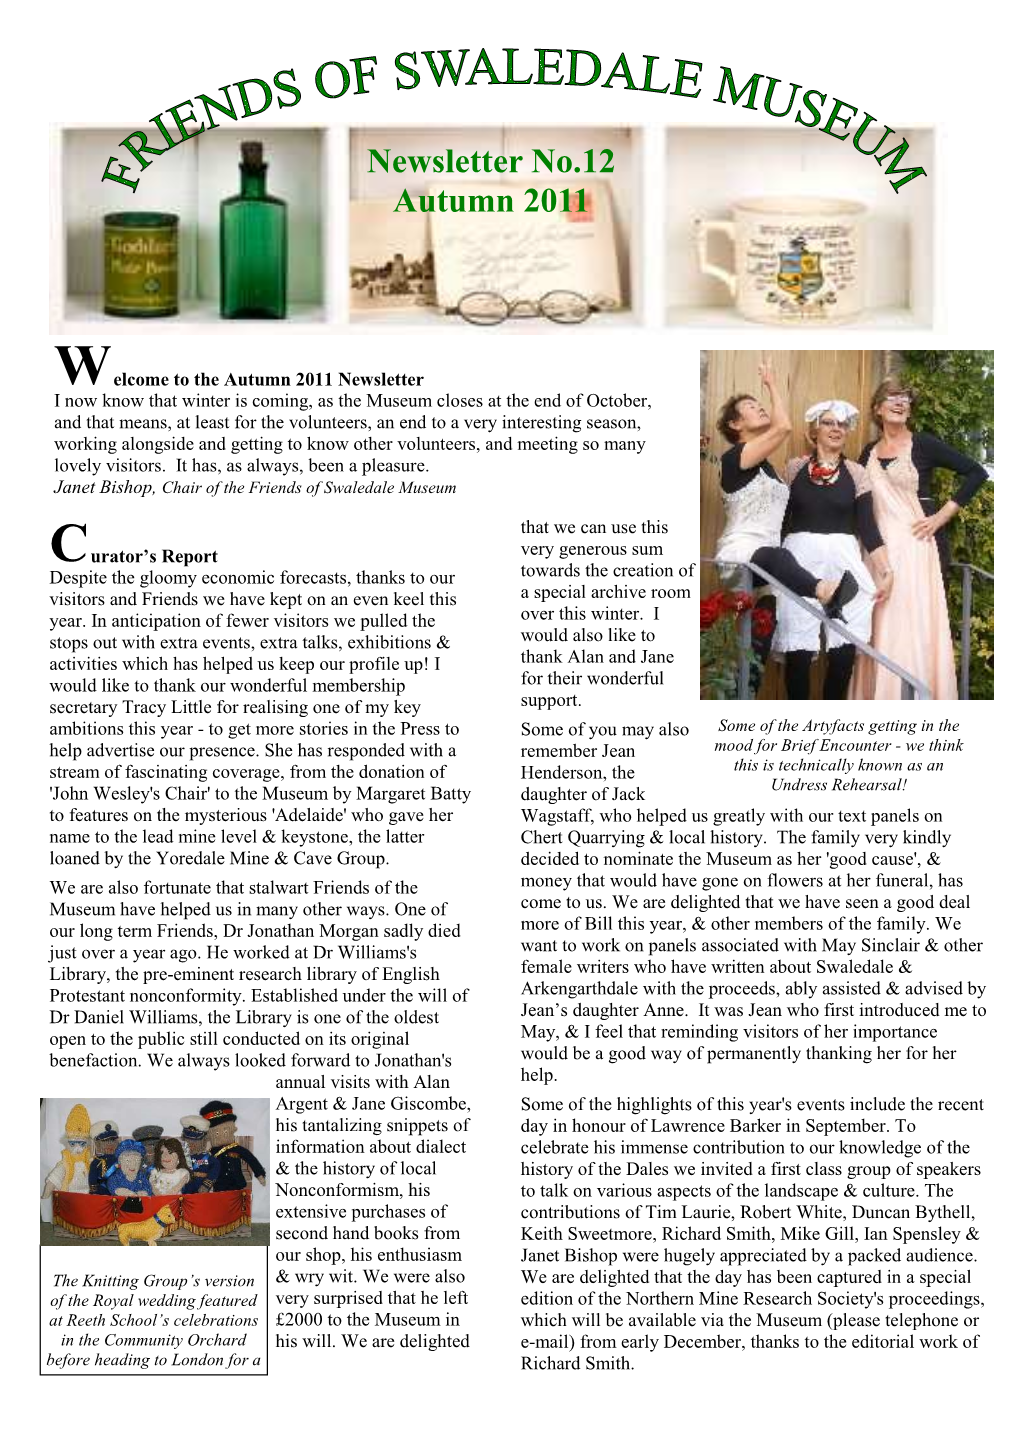 Swaledale Museum Newsletter Autumn 2011 For